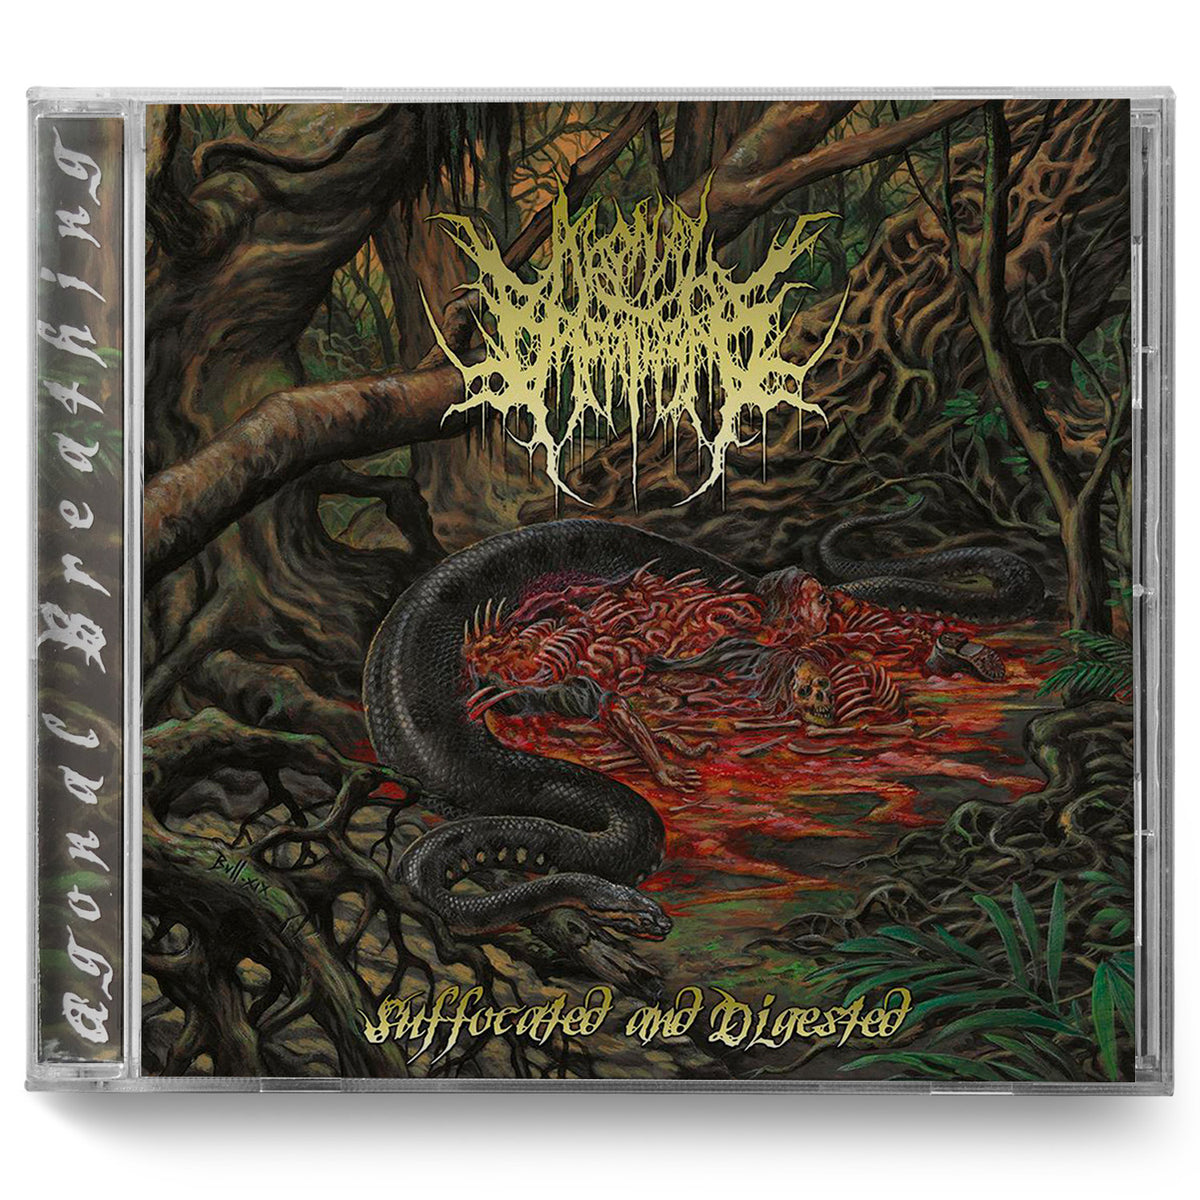 Agonal Breathing "Suffocated and Digested" CD - Miasma Records